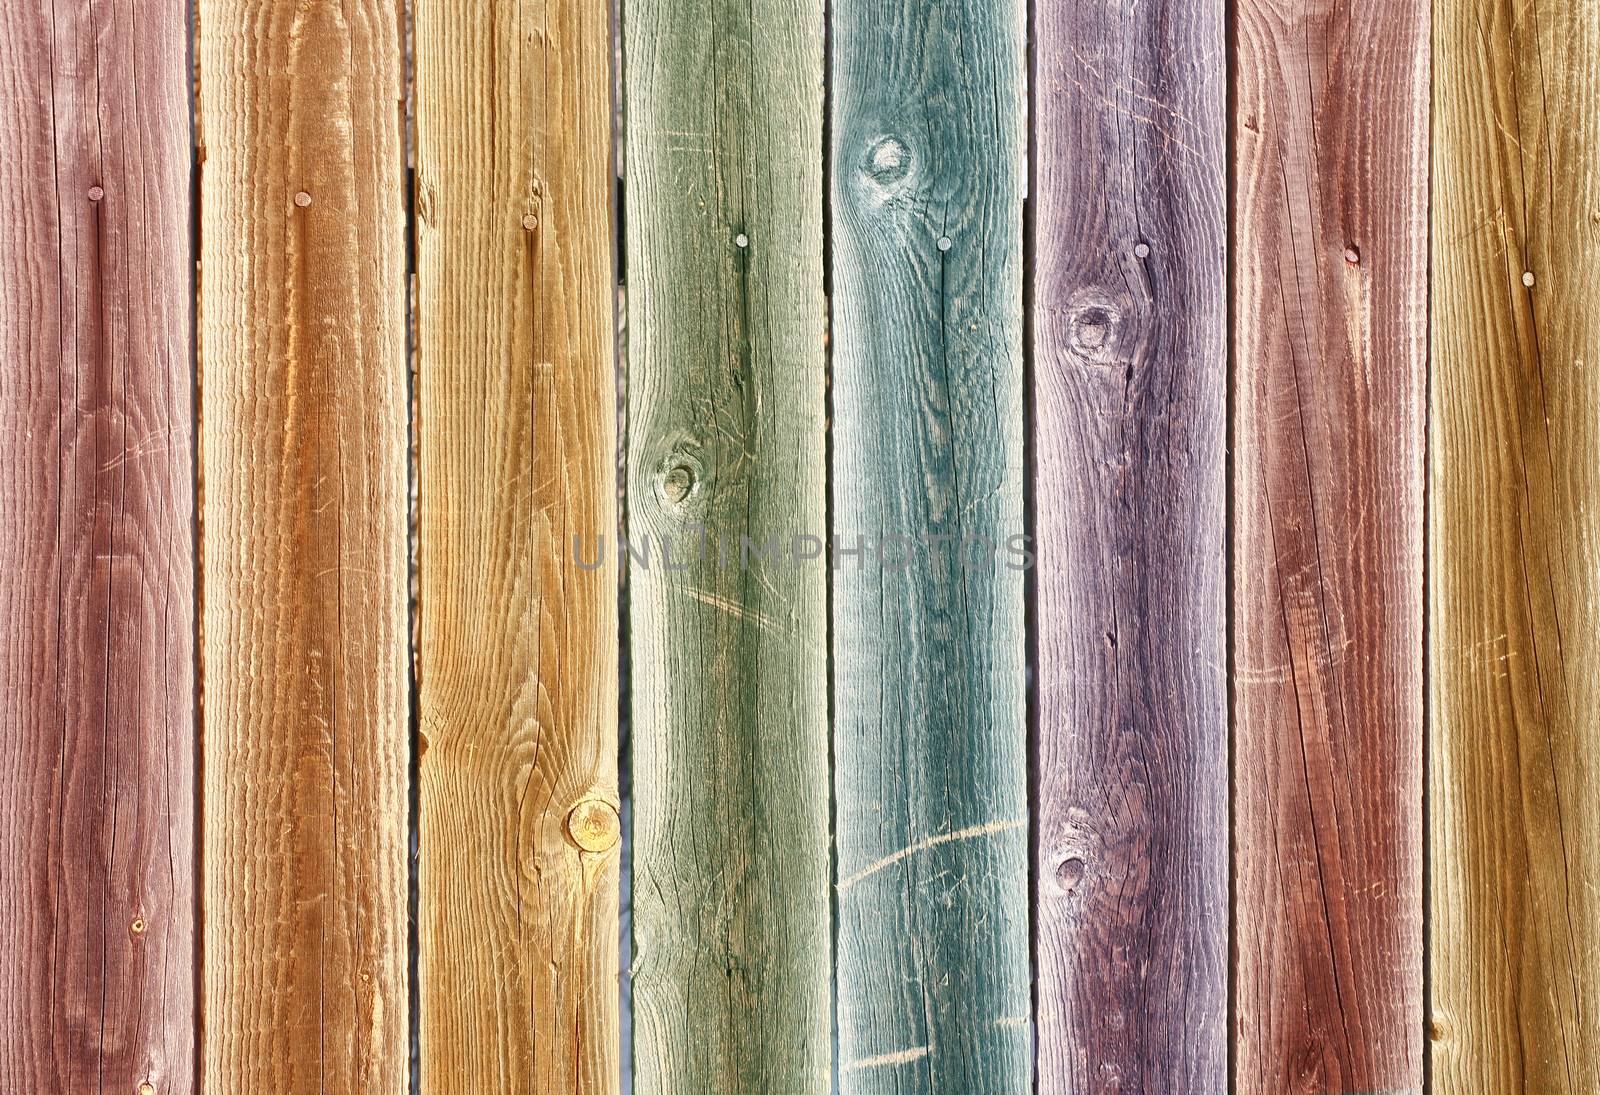 Background of multi-coloured vertical wooden boards